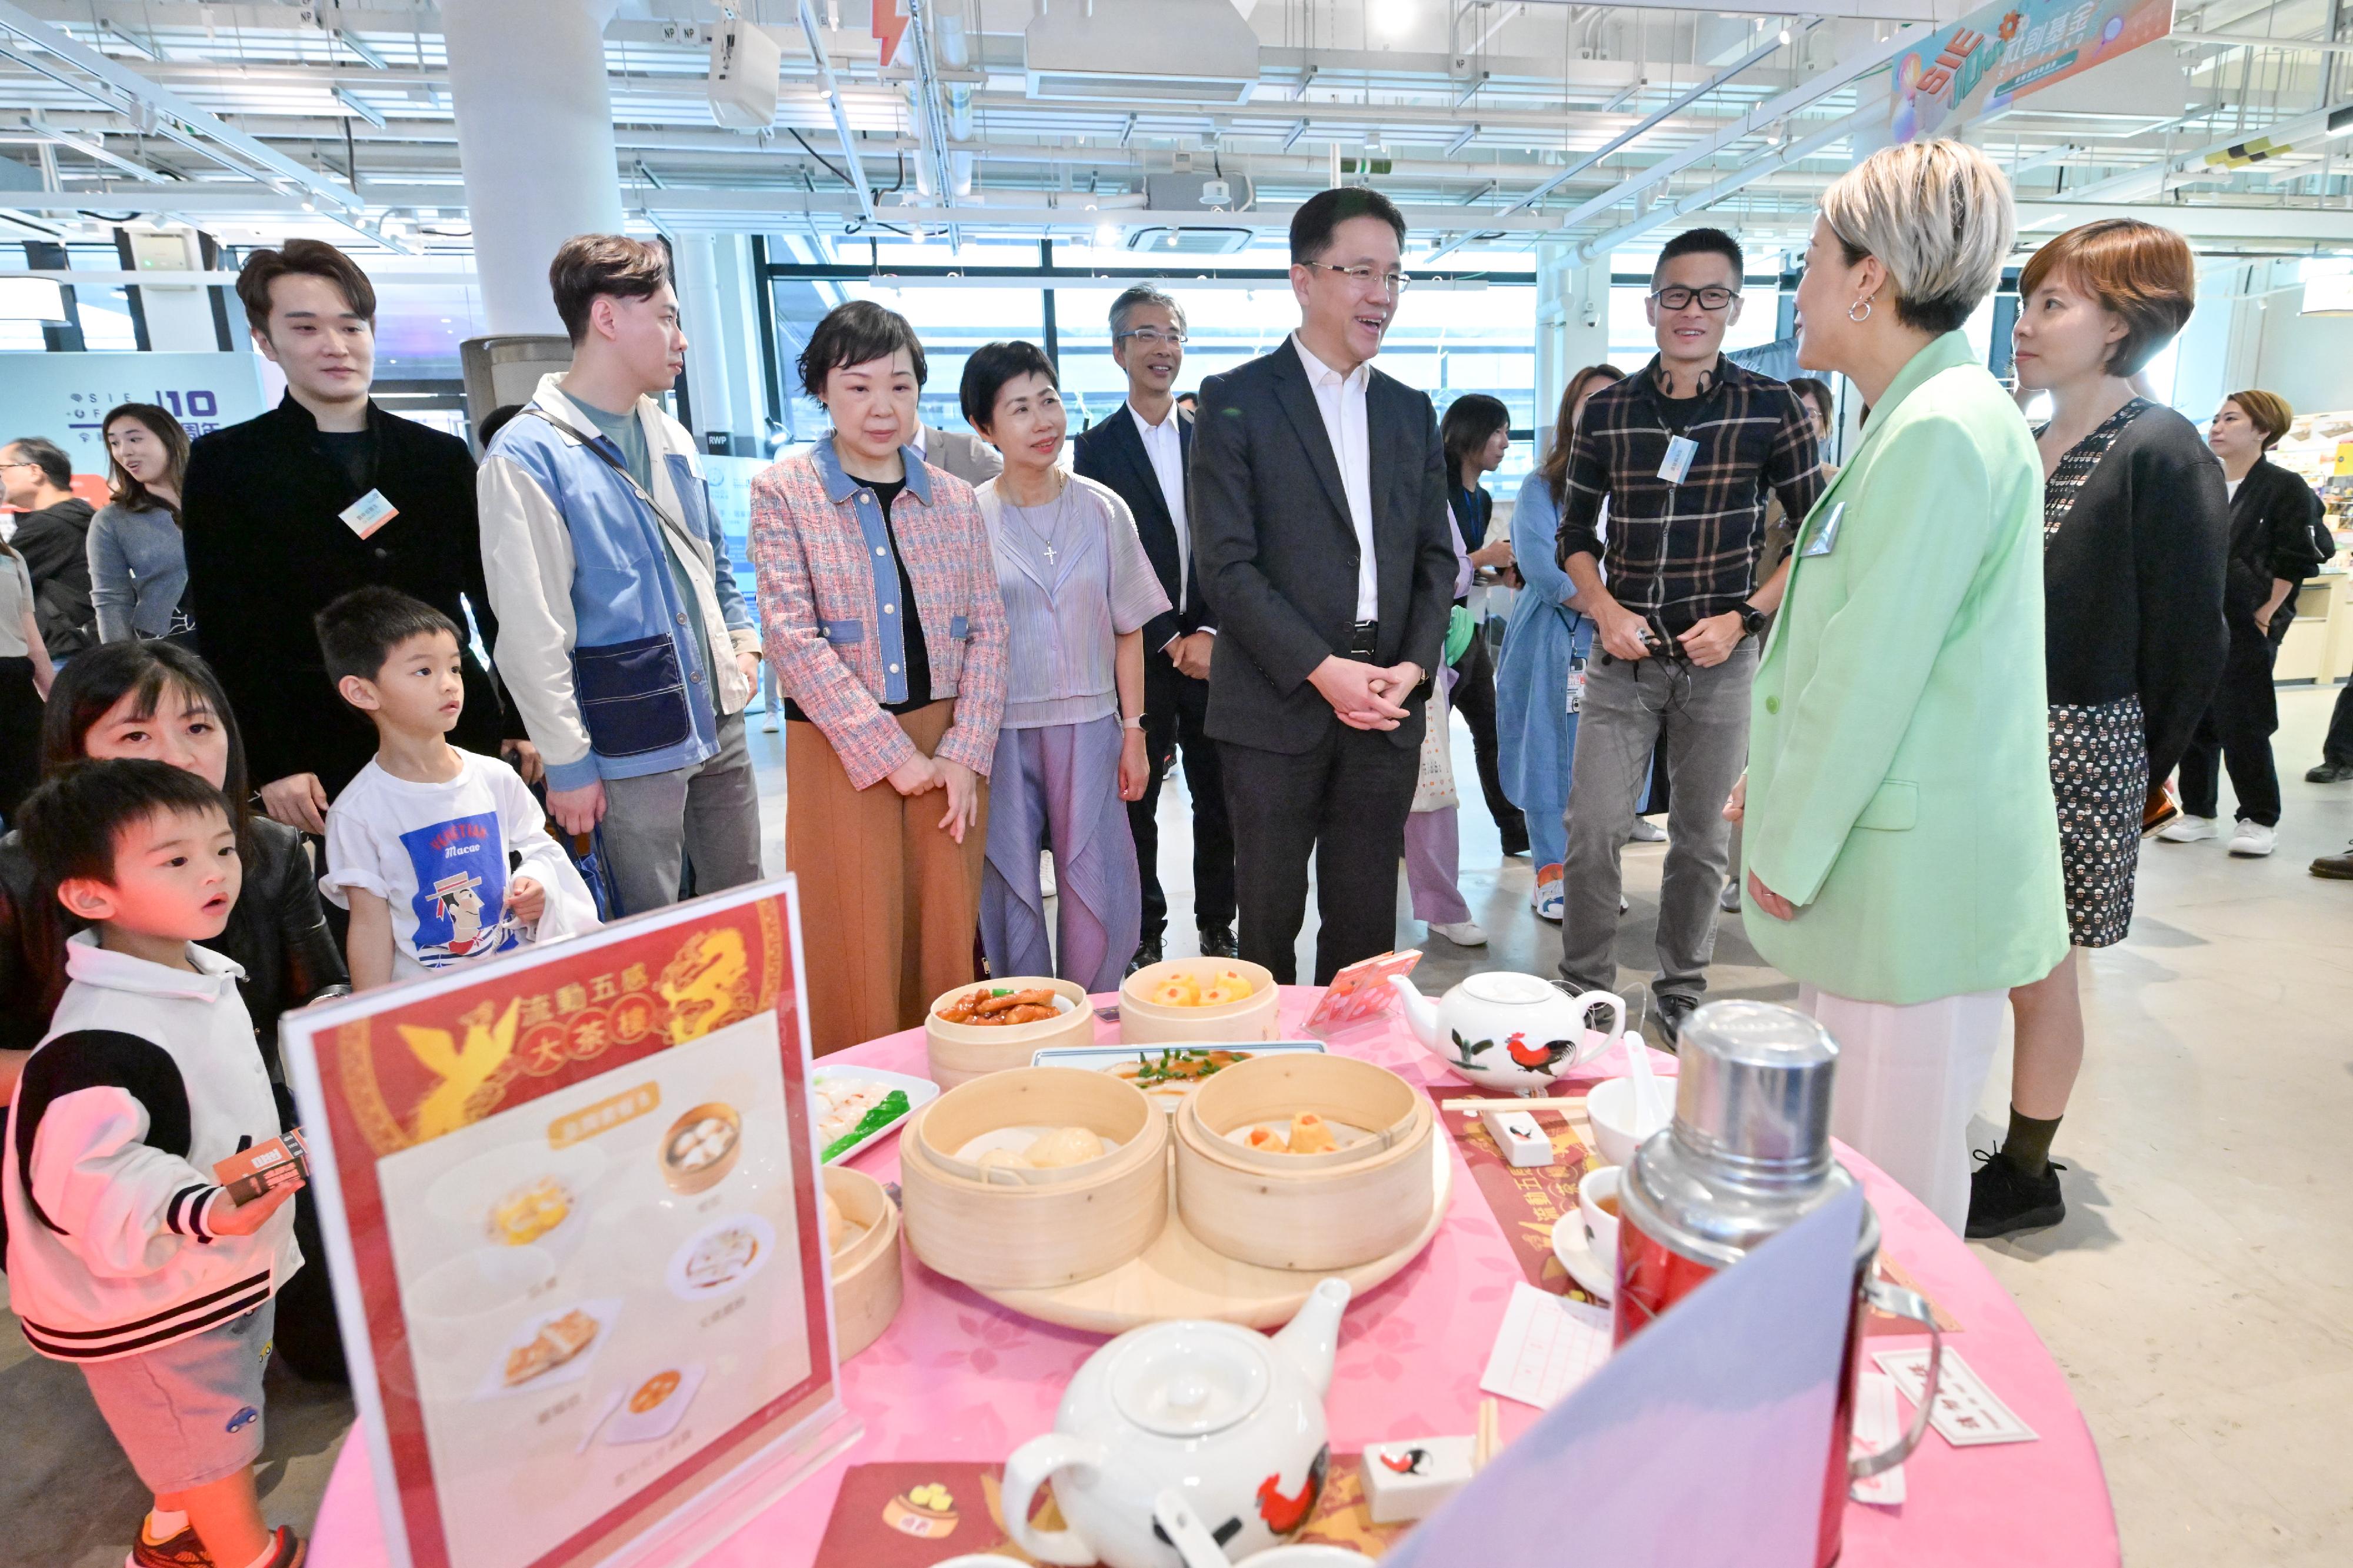 The Social Innovation Carnival, organised by the Efficiency Office under the Innovation, Technology and Industry Bureau, is being held. Picture shows the Secretary for Innovation, Technology and Industry, Professor Sun Dong (fourth right); the Chairperson of the Social Innovation and Entrepreneurship Development Fund (SIE Fund) Task Force, Dr Jane Lee (fourth left); and the Commissioner for Efficiency and Secretary-General of the SIE Fund Task Force Secretariat, Miss Patricia So (third left), touring around exhibition booths today (November 25) to learn more about the achievements of the SIE Fund since its establishment.